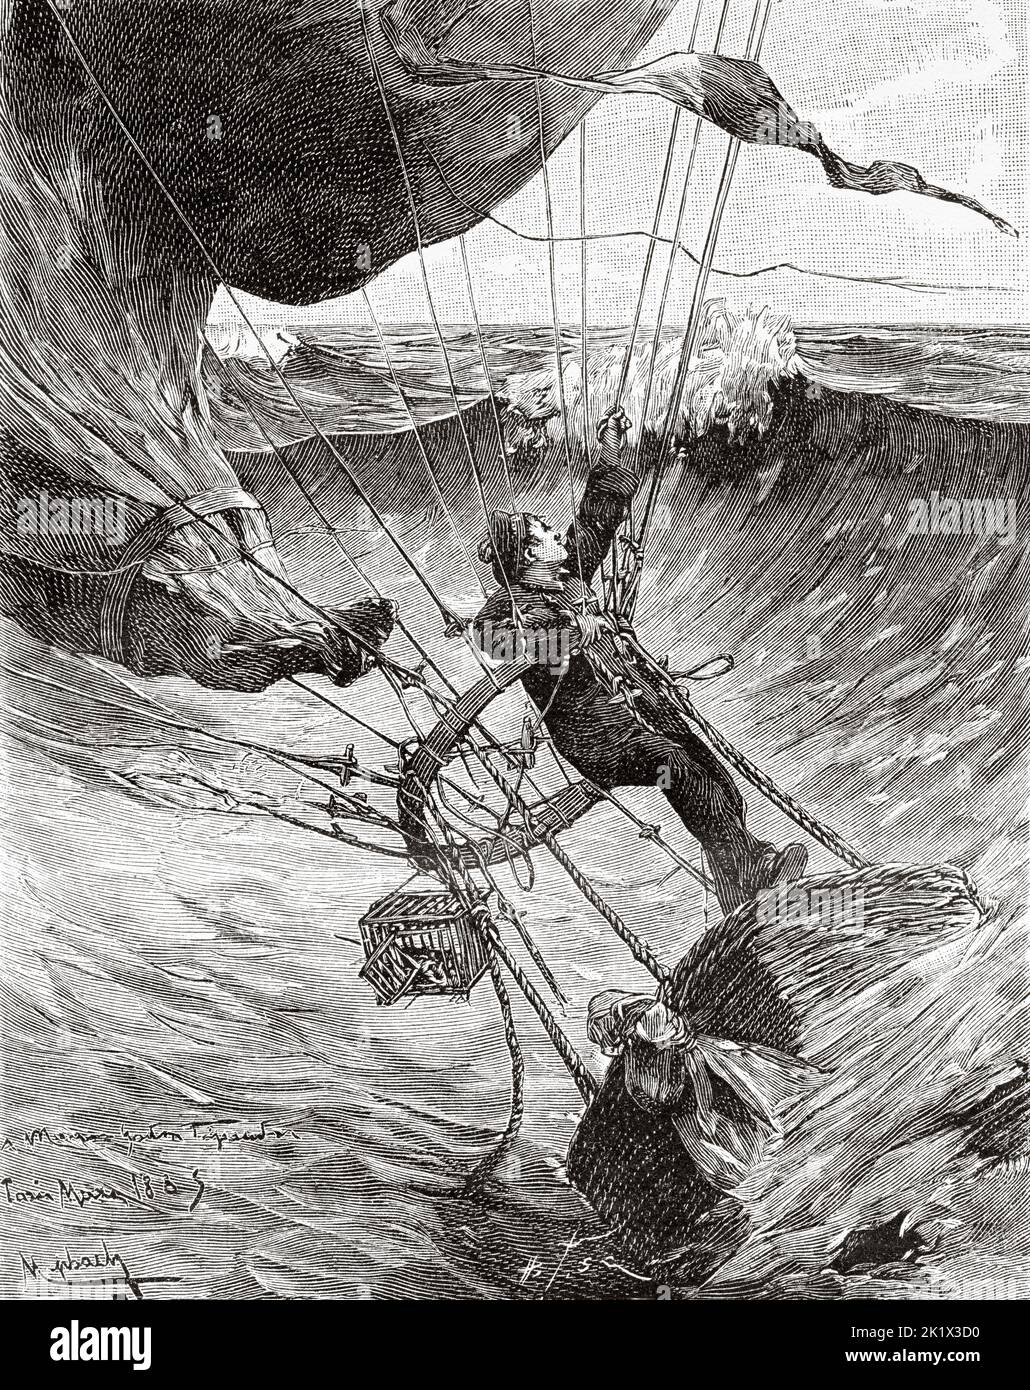 Balloon from the siege of Paris lost at sea on November 30, 1870, death of the sailor Prince. Old 19th century engraved illustration from La Nature 1890 Stock Photo